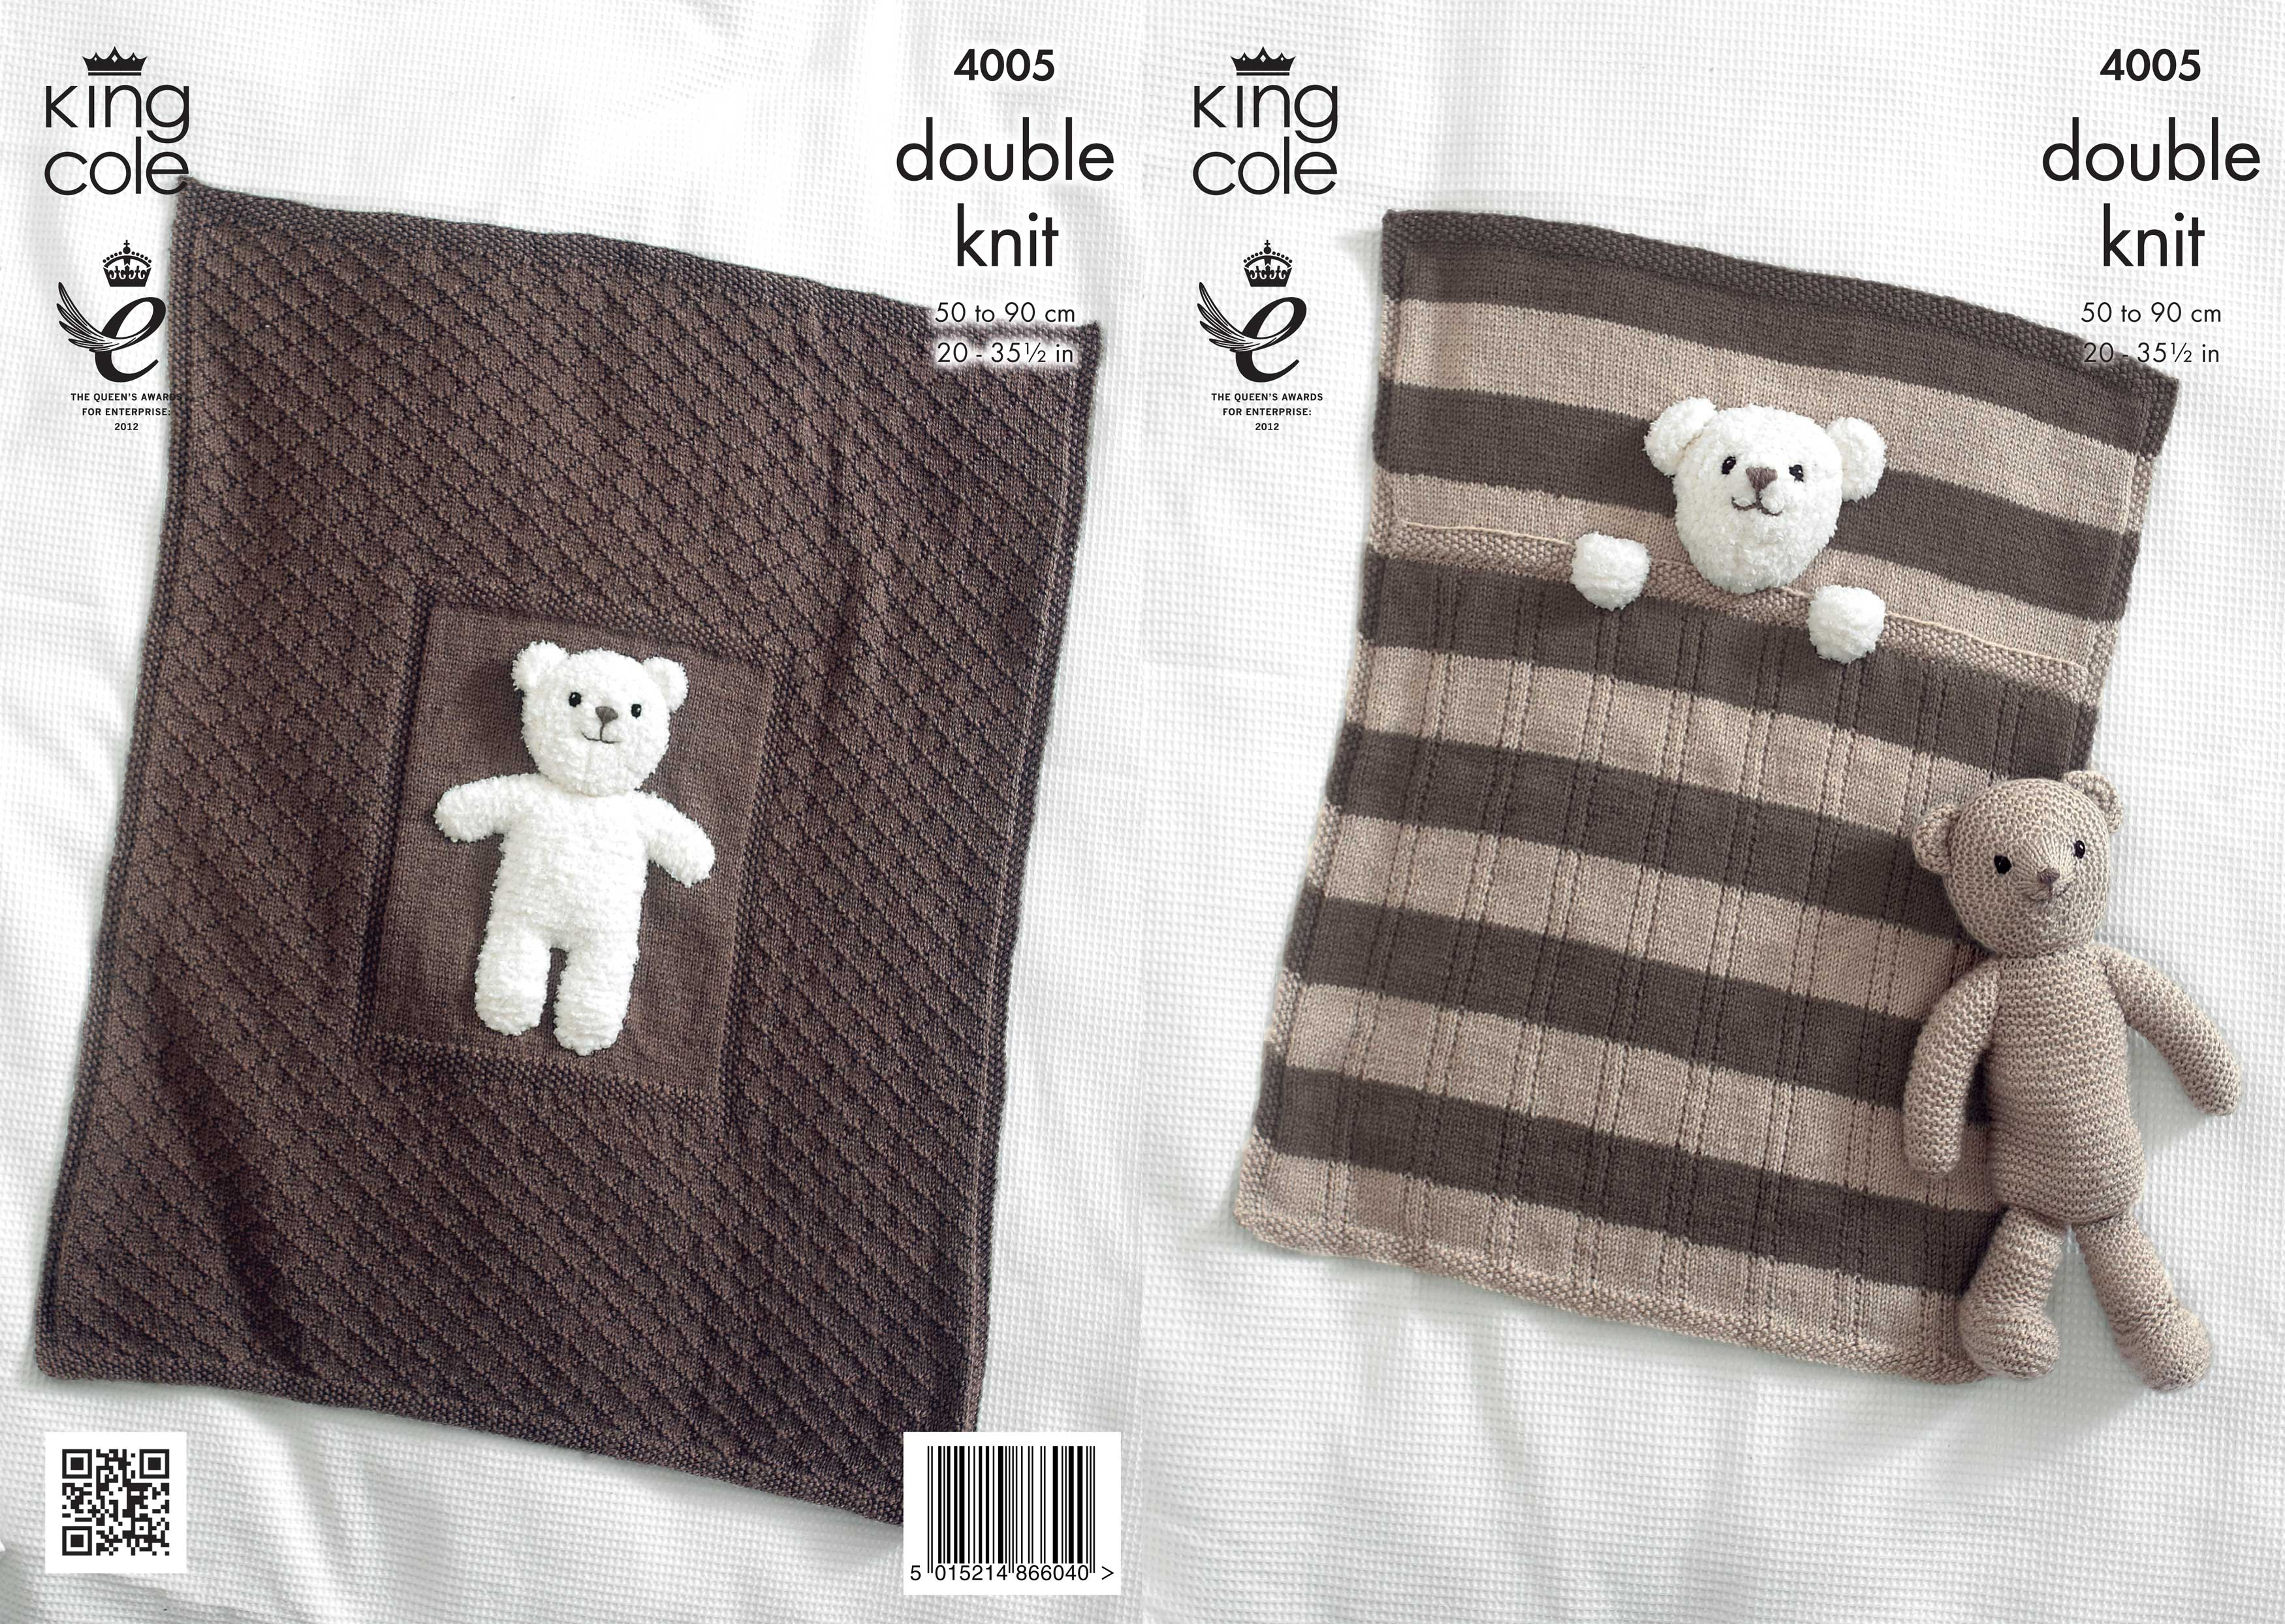 Knitting Patterns For Baby Toys Details About King Cole Double Knitting Pattern Blanket Teddy Bear Toy Cuddles Comfort Dk 4005